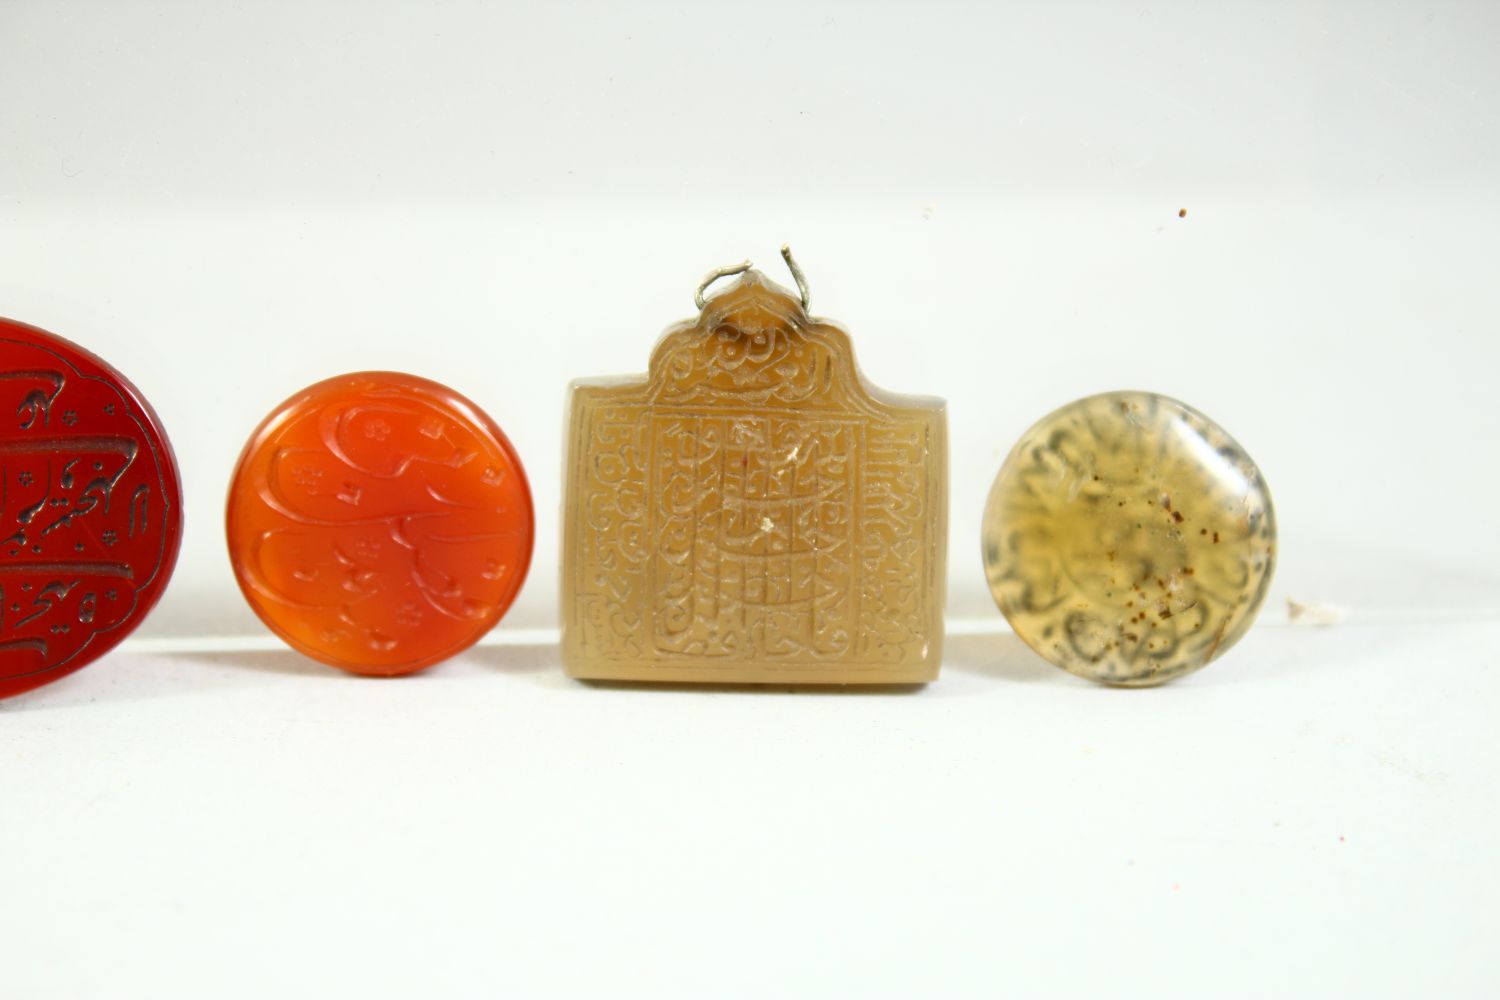 EIGHT SMALL ISLAMIC ENGRAVED CALLIGRAPHIC SEALS, of various stones (8). - Image 8 of 9